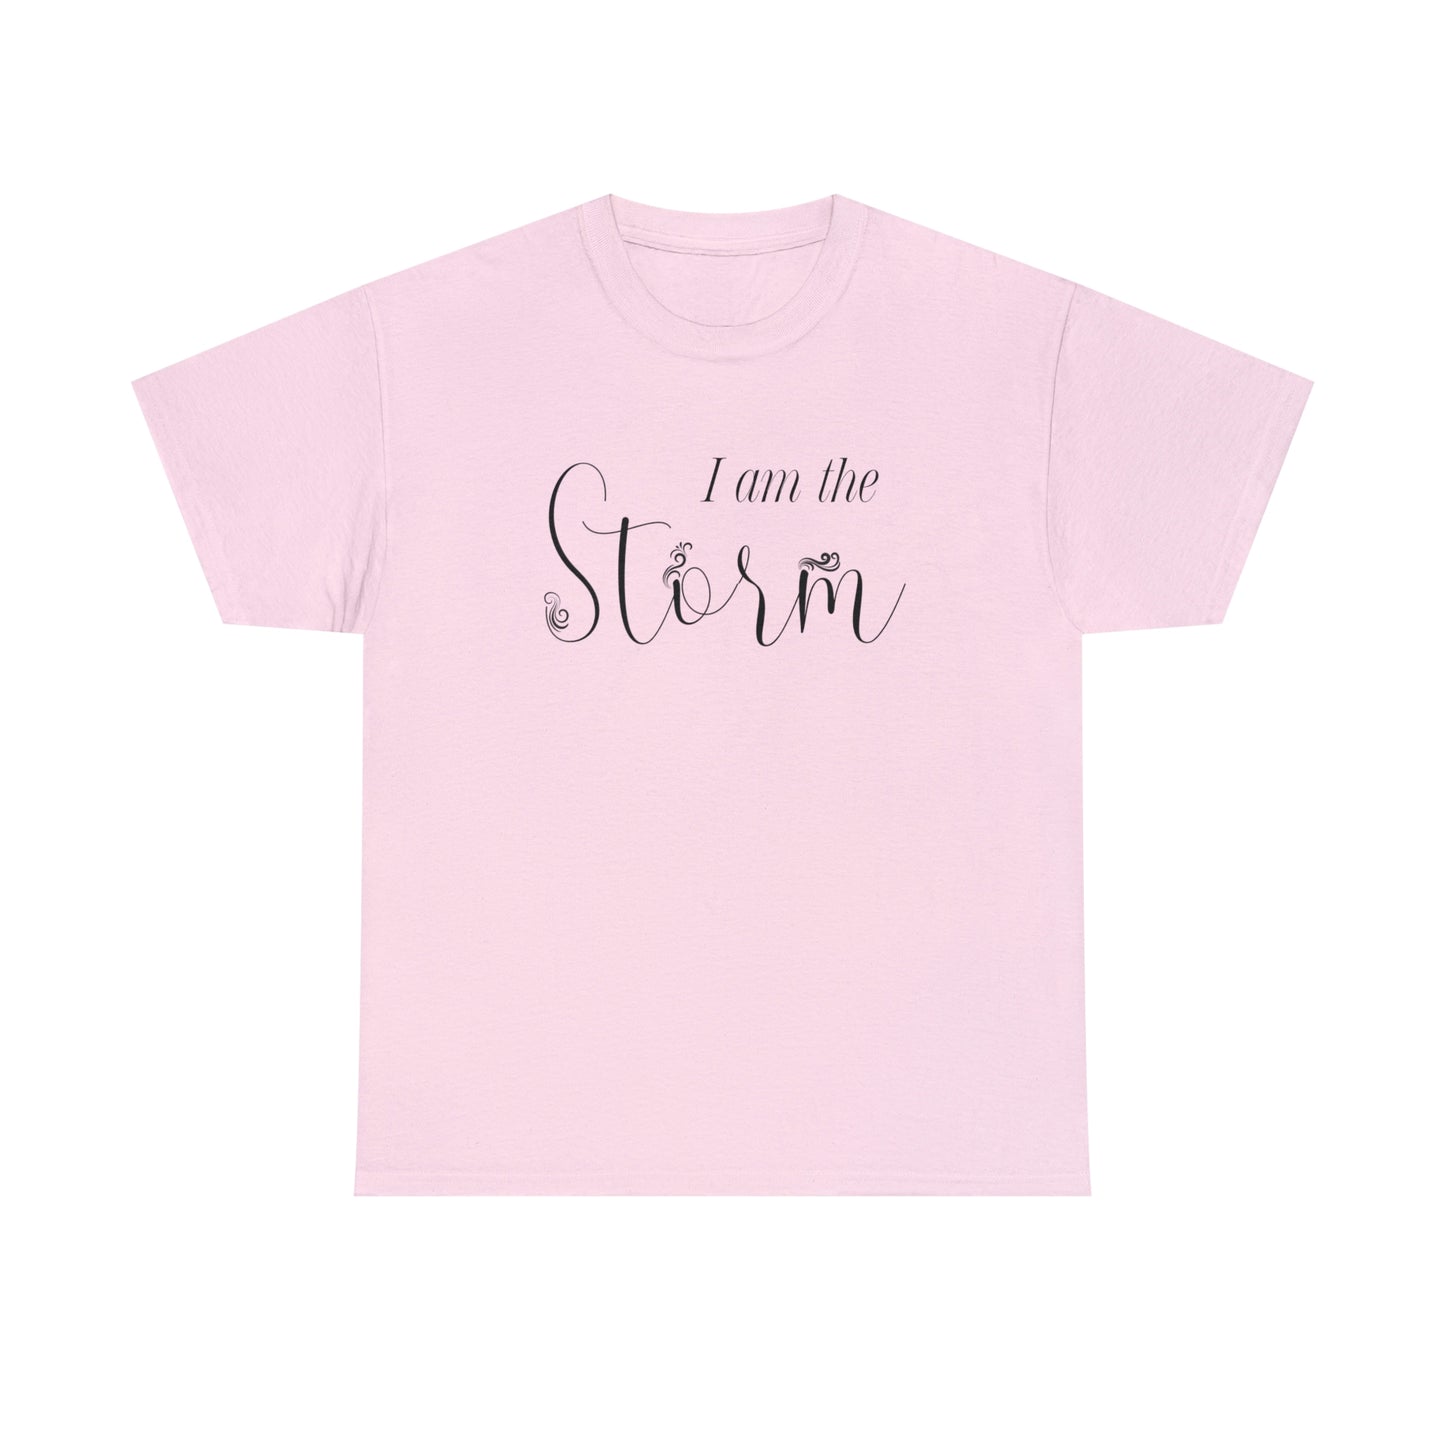 The Storm T-Shirt Inspirational Quote TShirt For Woman T Shirt Motivational Shirt For Woman Shirt Positive Message Tee